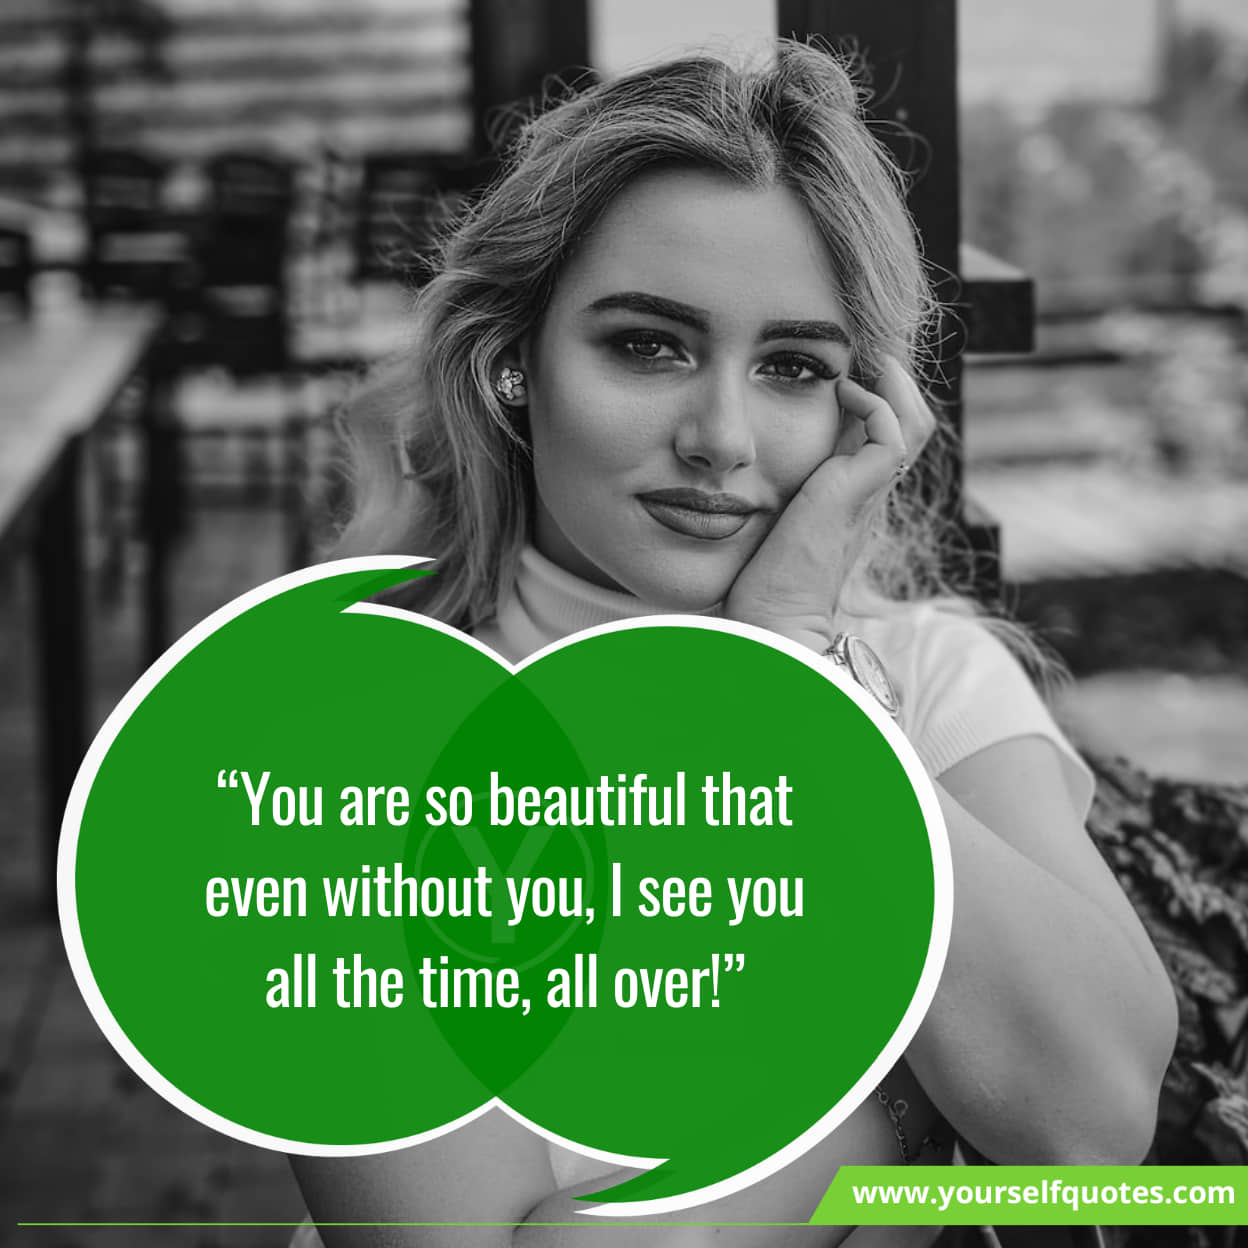 You Are So Beautiful Messages Quotes To Admire The Beauty – LAH SAFI Y